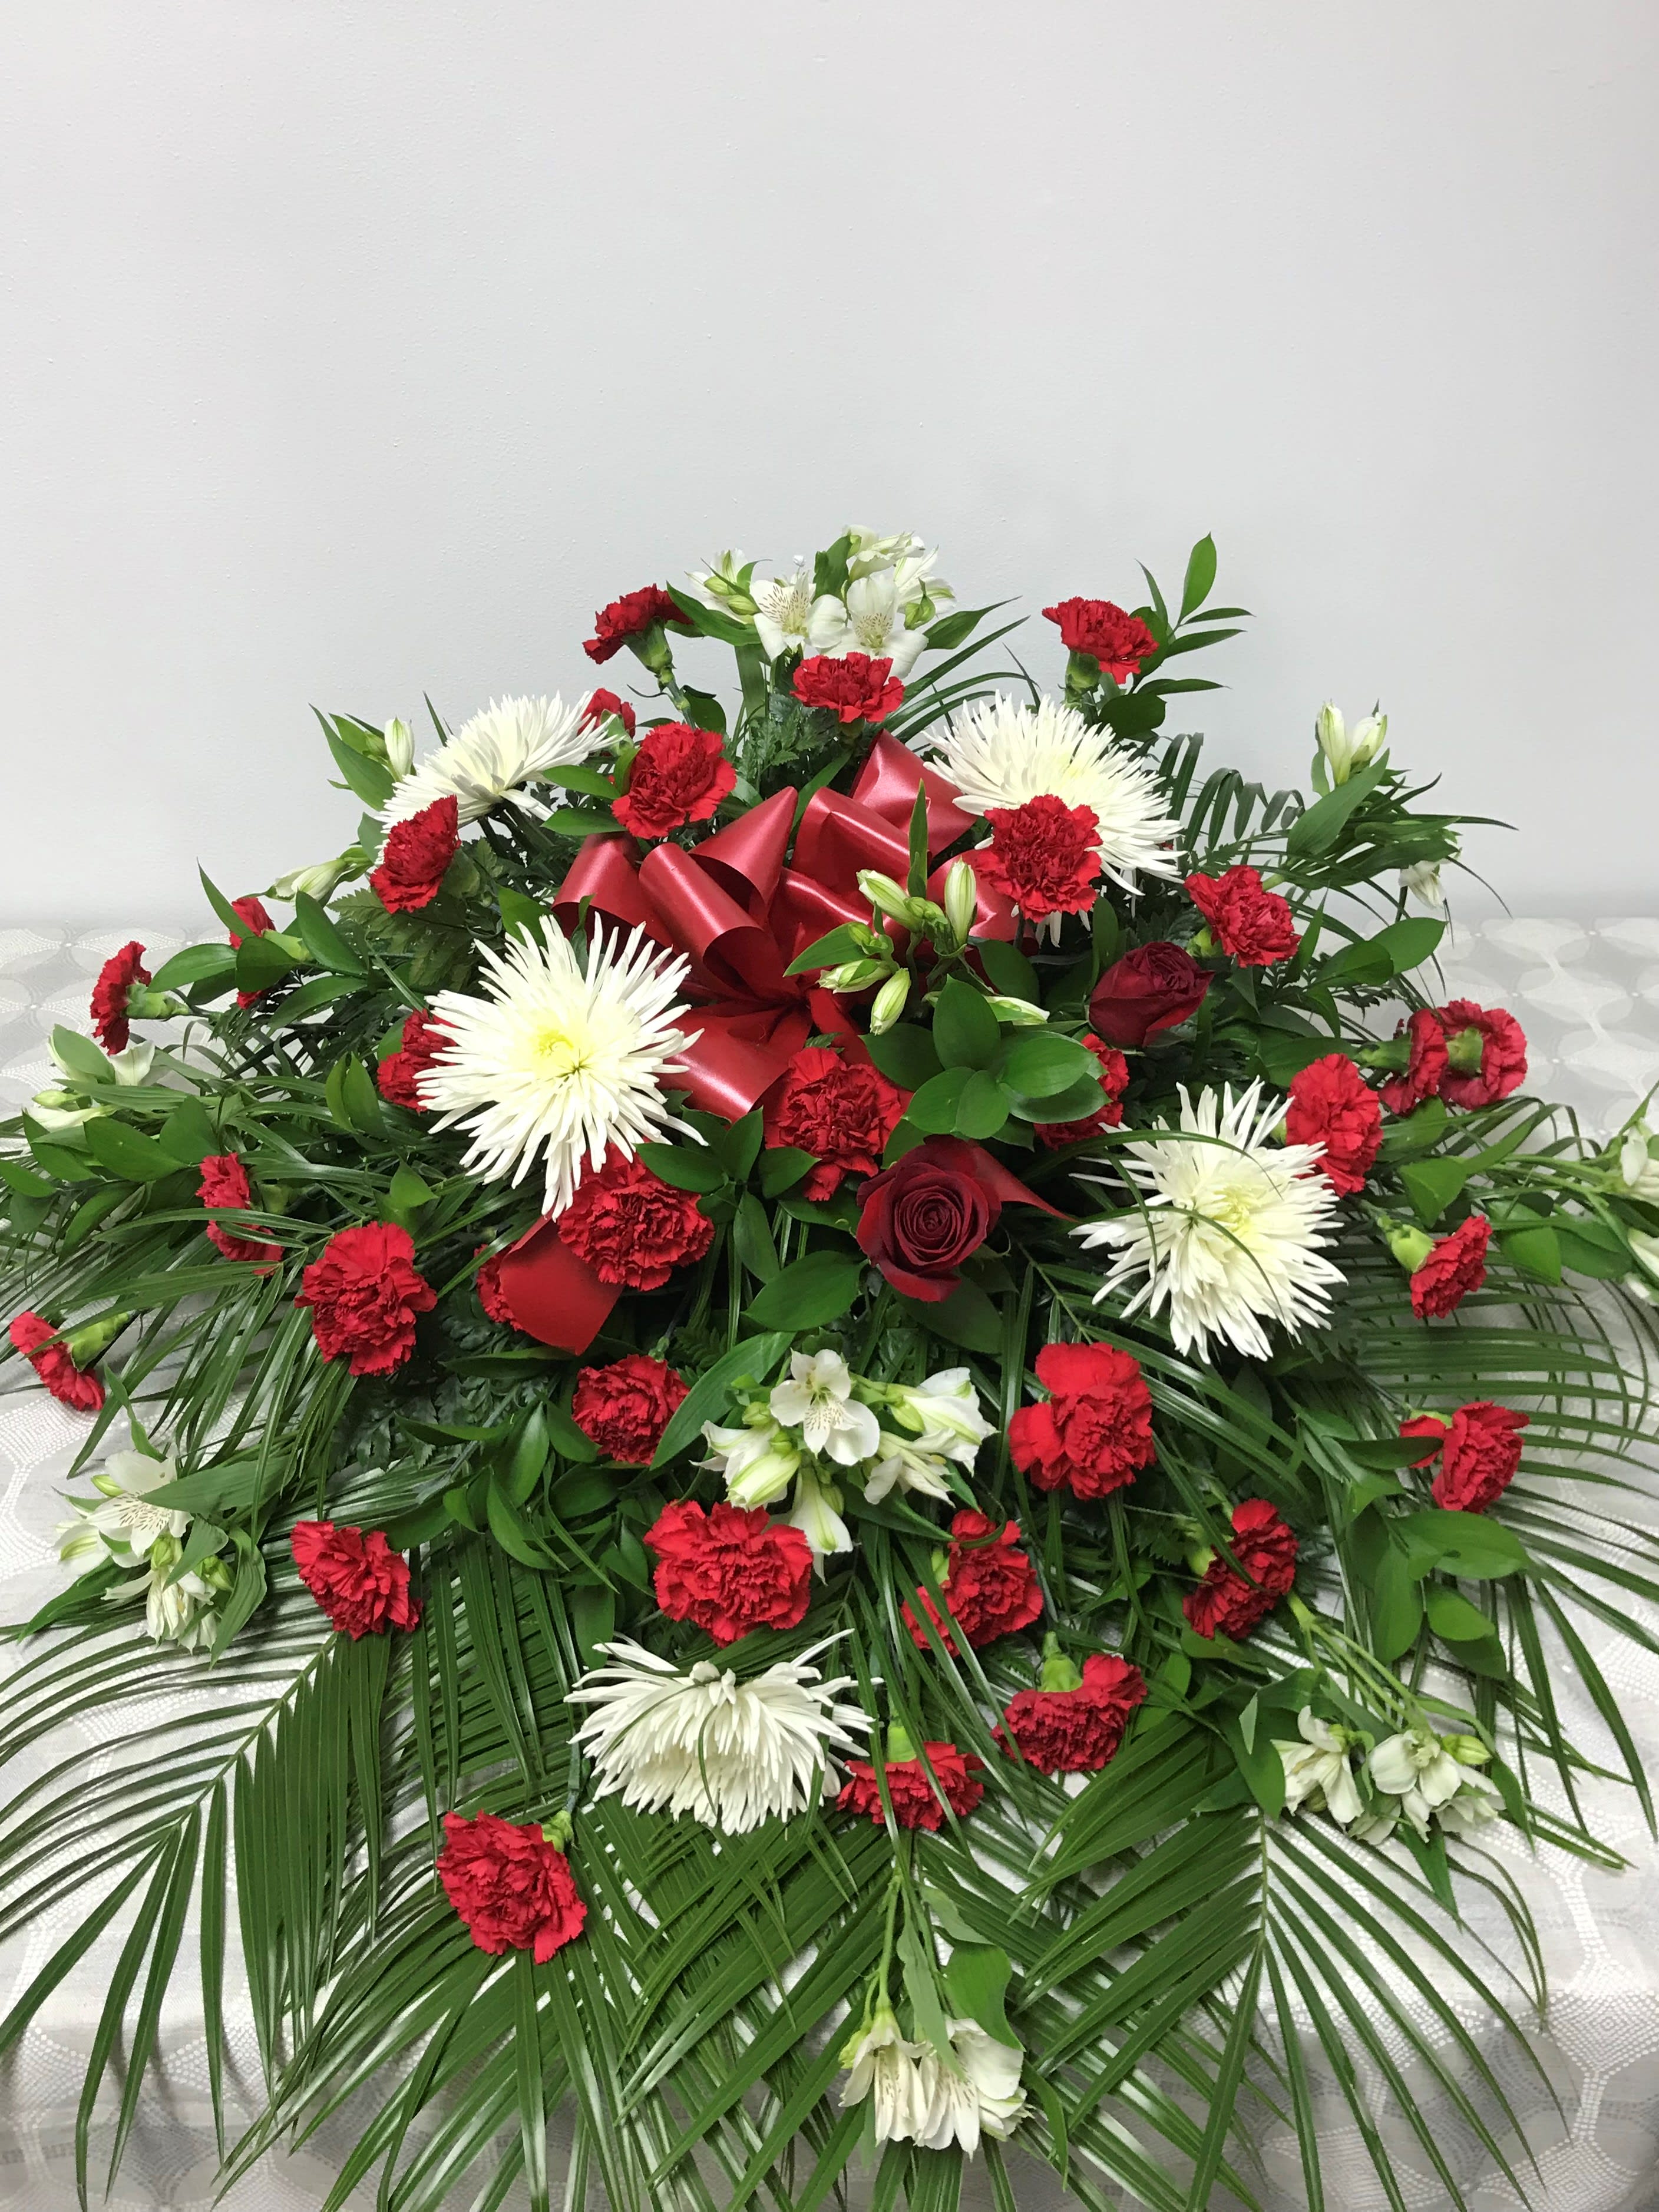 Graceful Casket Spray  - A meaningful and sincere way to honor a loved one, is with an elegant half casket spray.  Exquisite red and white flowers elegantly drape the casket, while serving as a beautiful tribute during their final service.